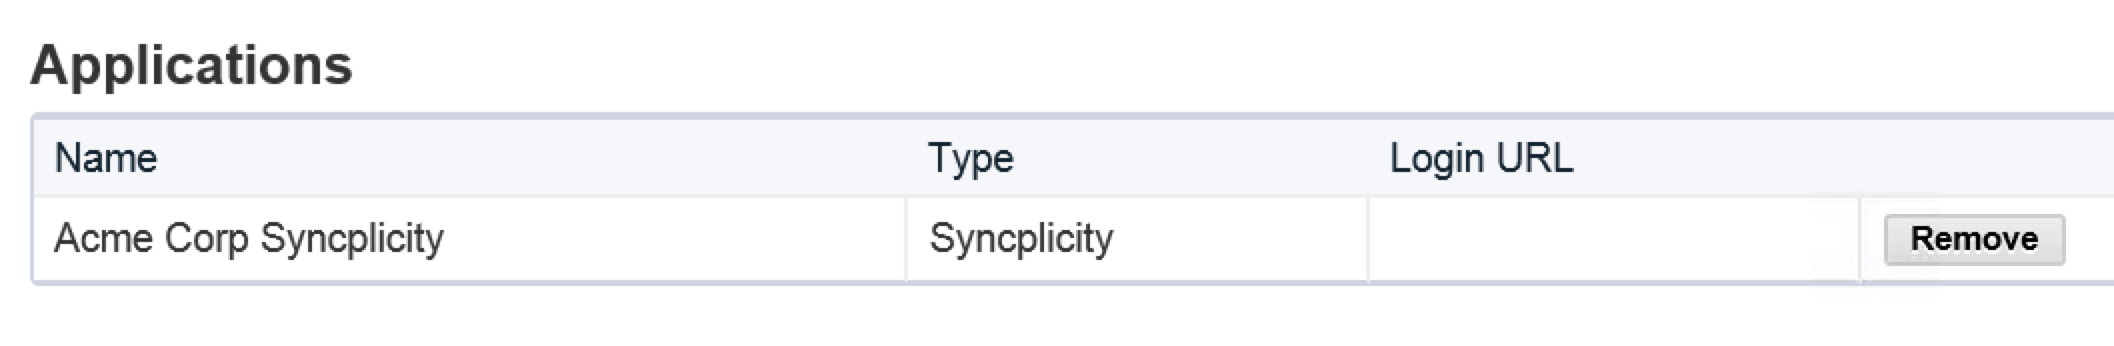 Syncplicity Application Added